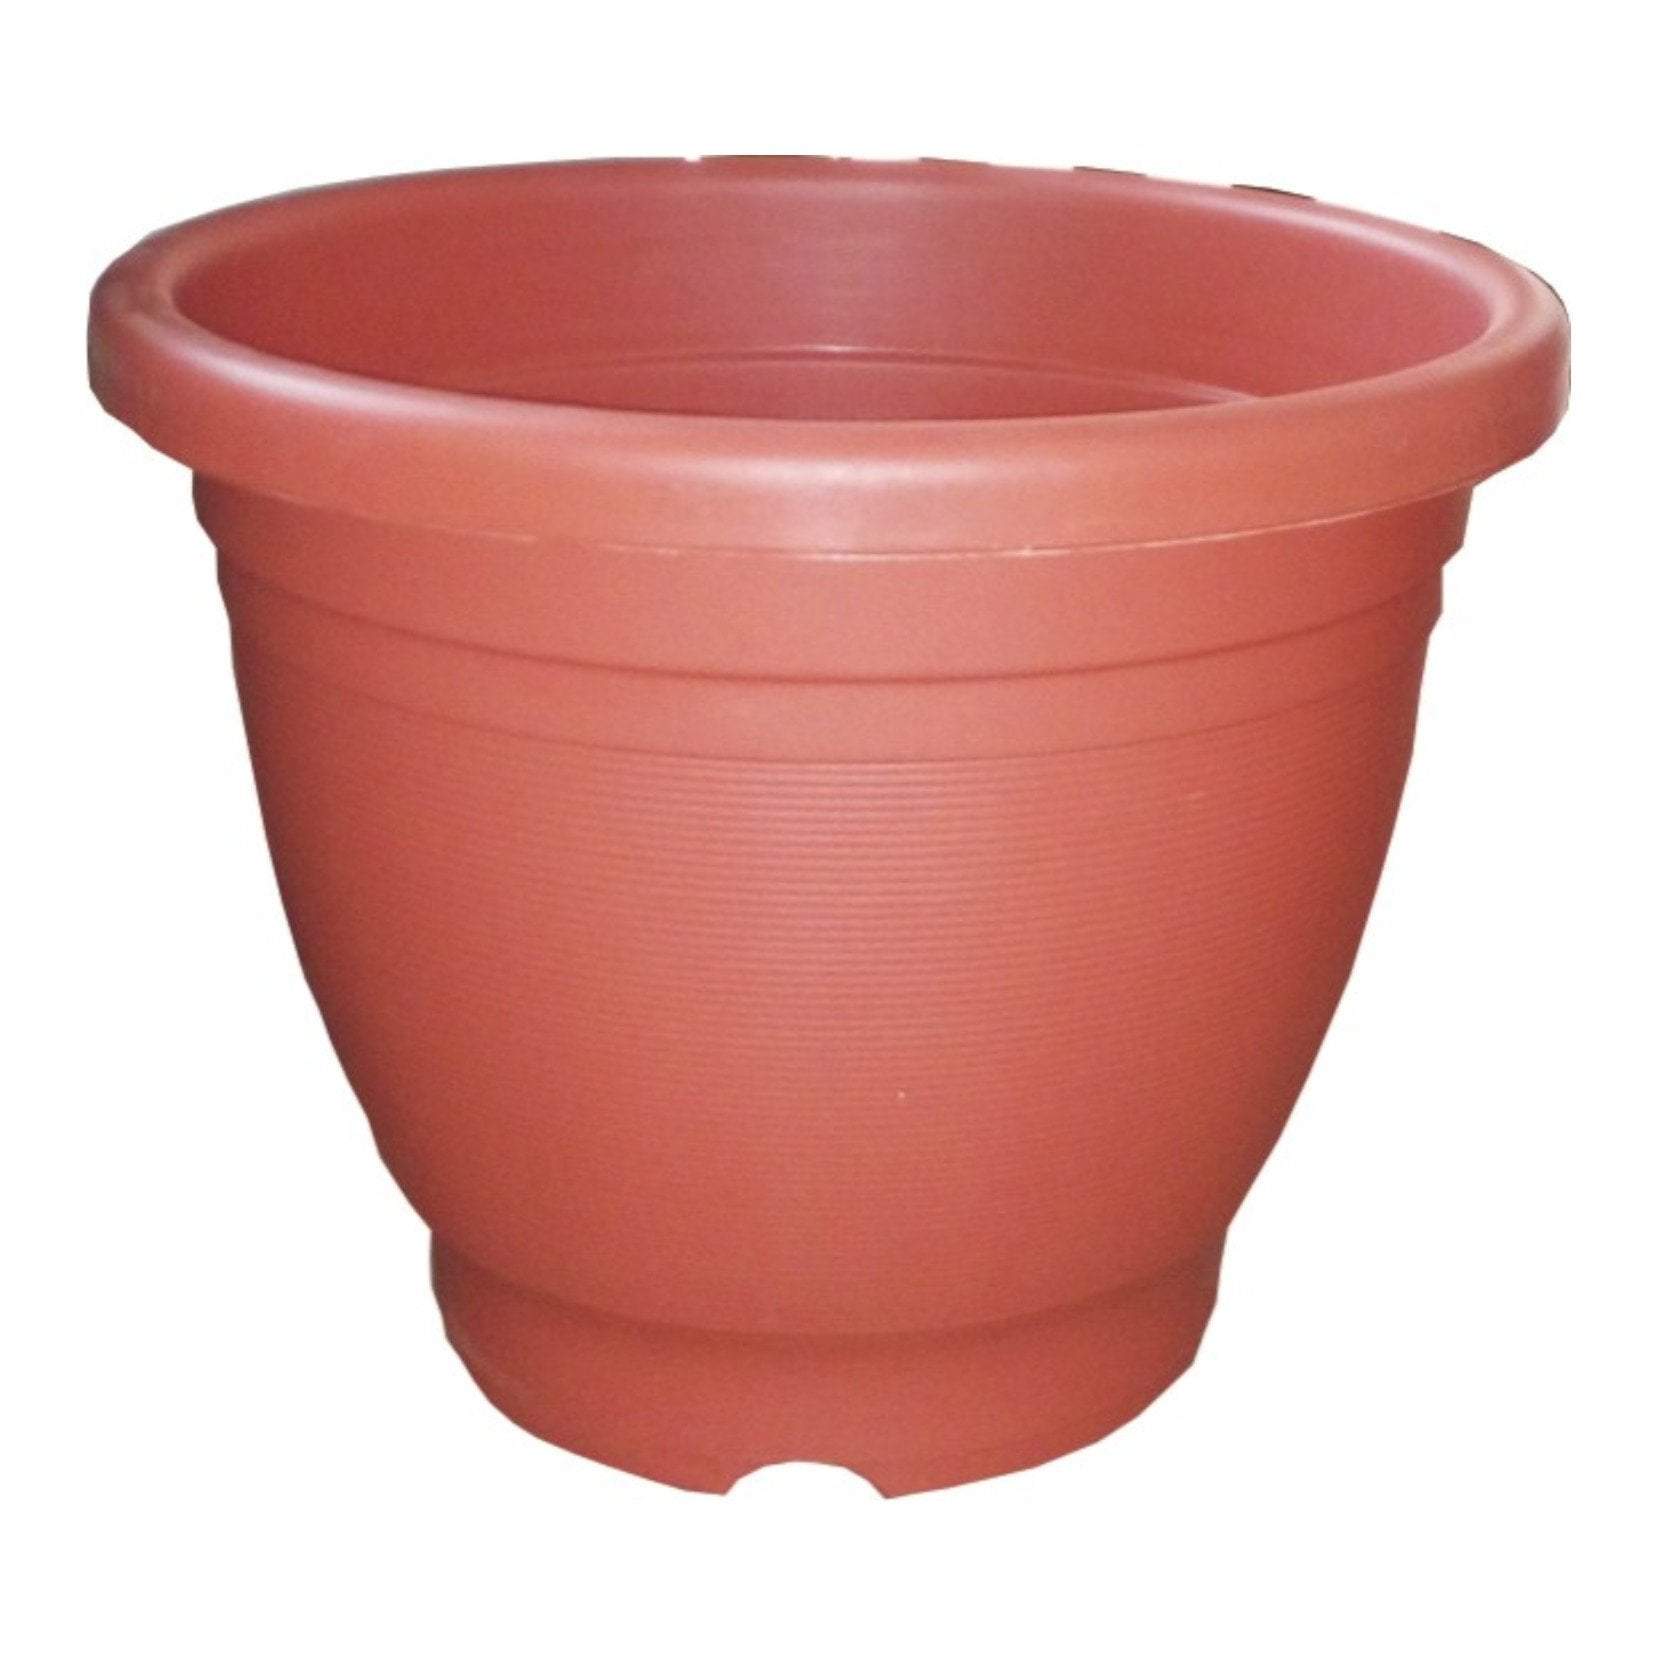 Medium size Plastic  Flower Pot  With Self Watering Grid